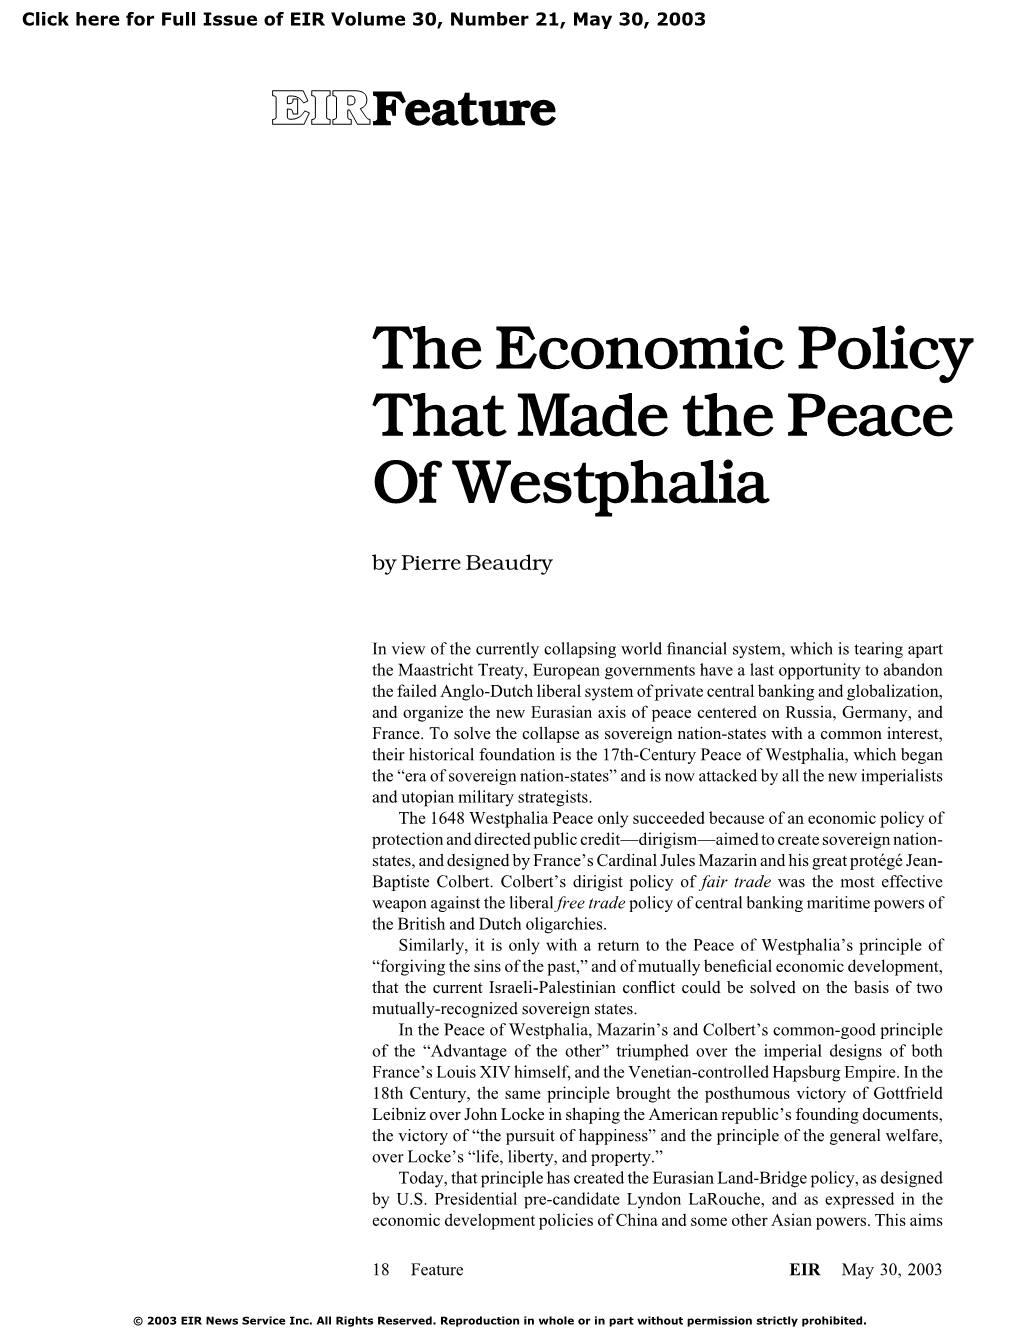 The Economic Policy That Made the Peace of Westphalia